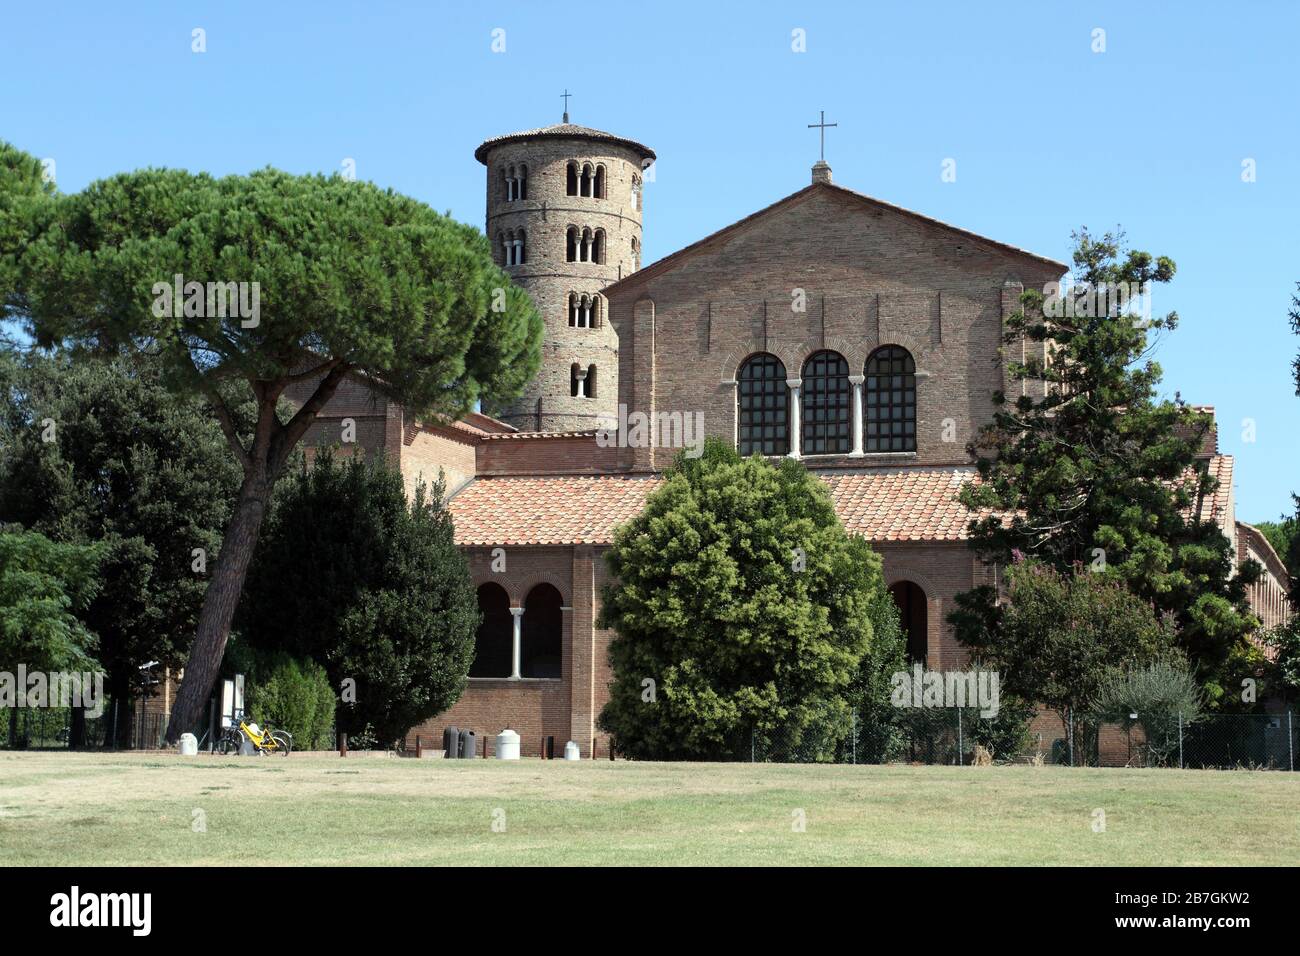 Ravenna, Italy - September 12, 2015: The Basilica of Sant'Apollinare in Classe Stock Photo